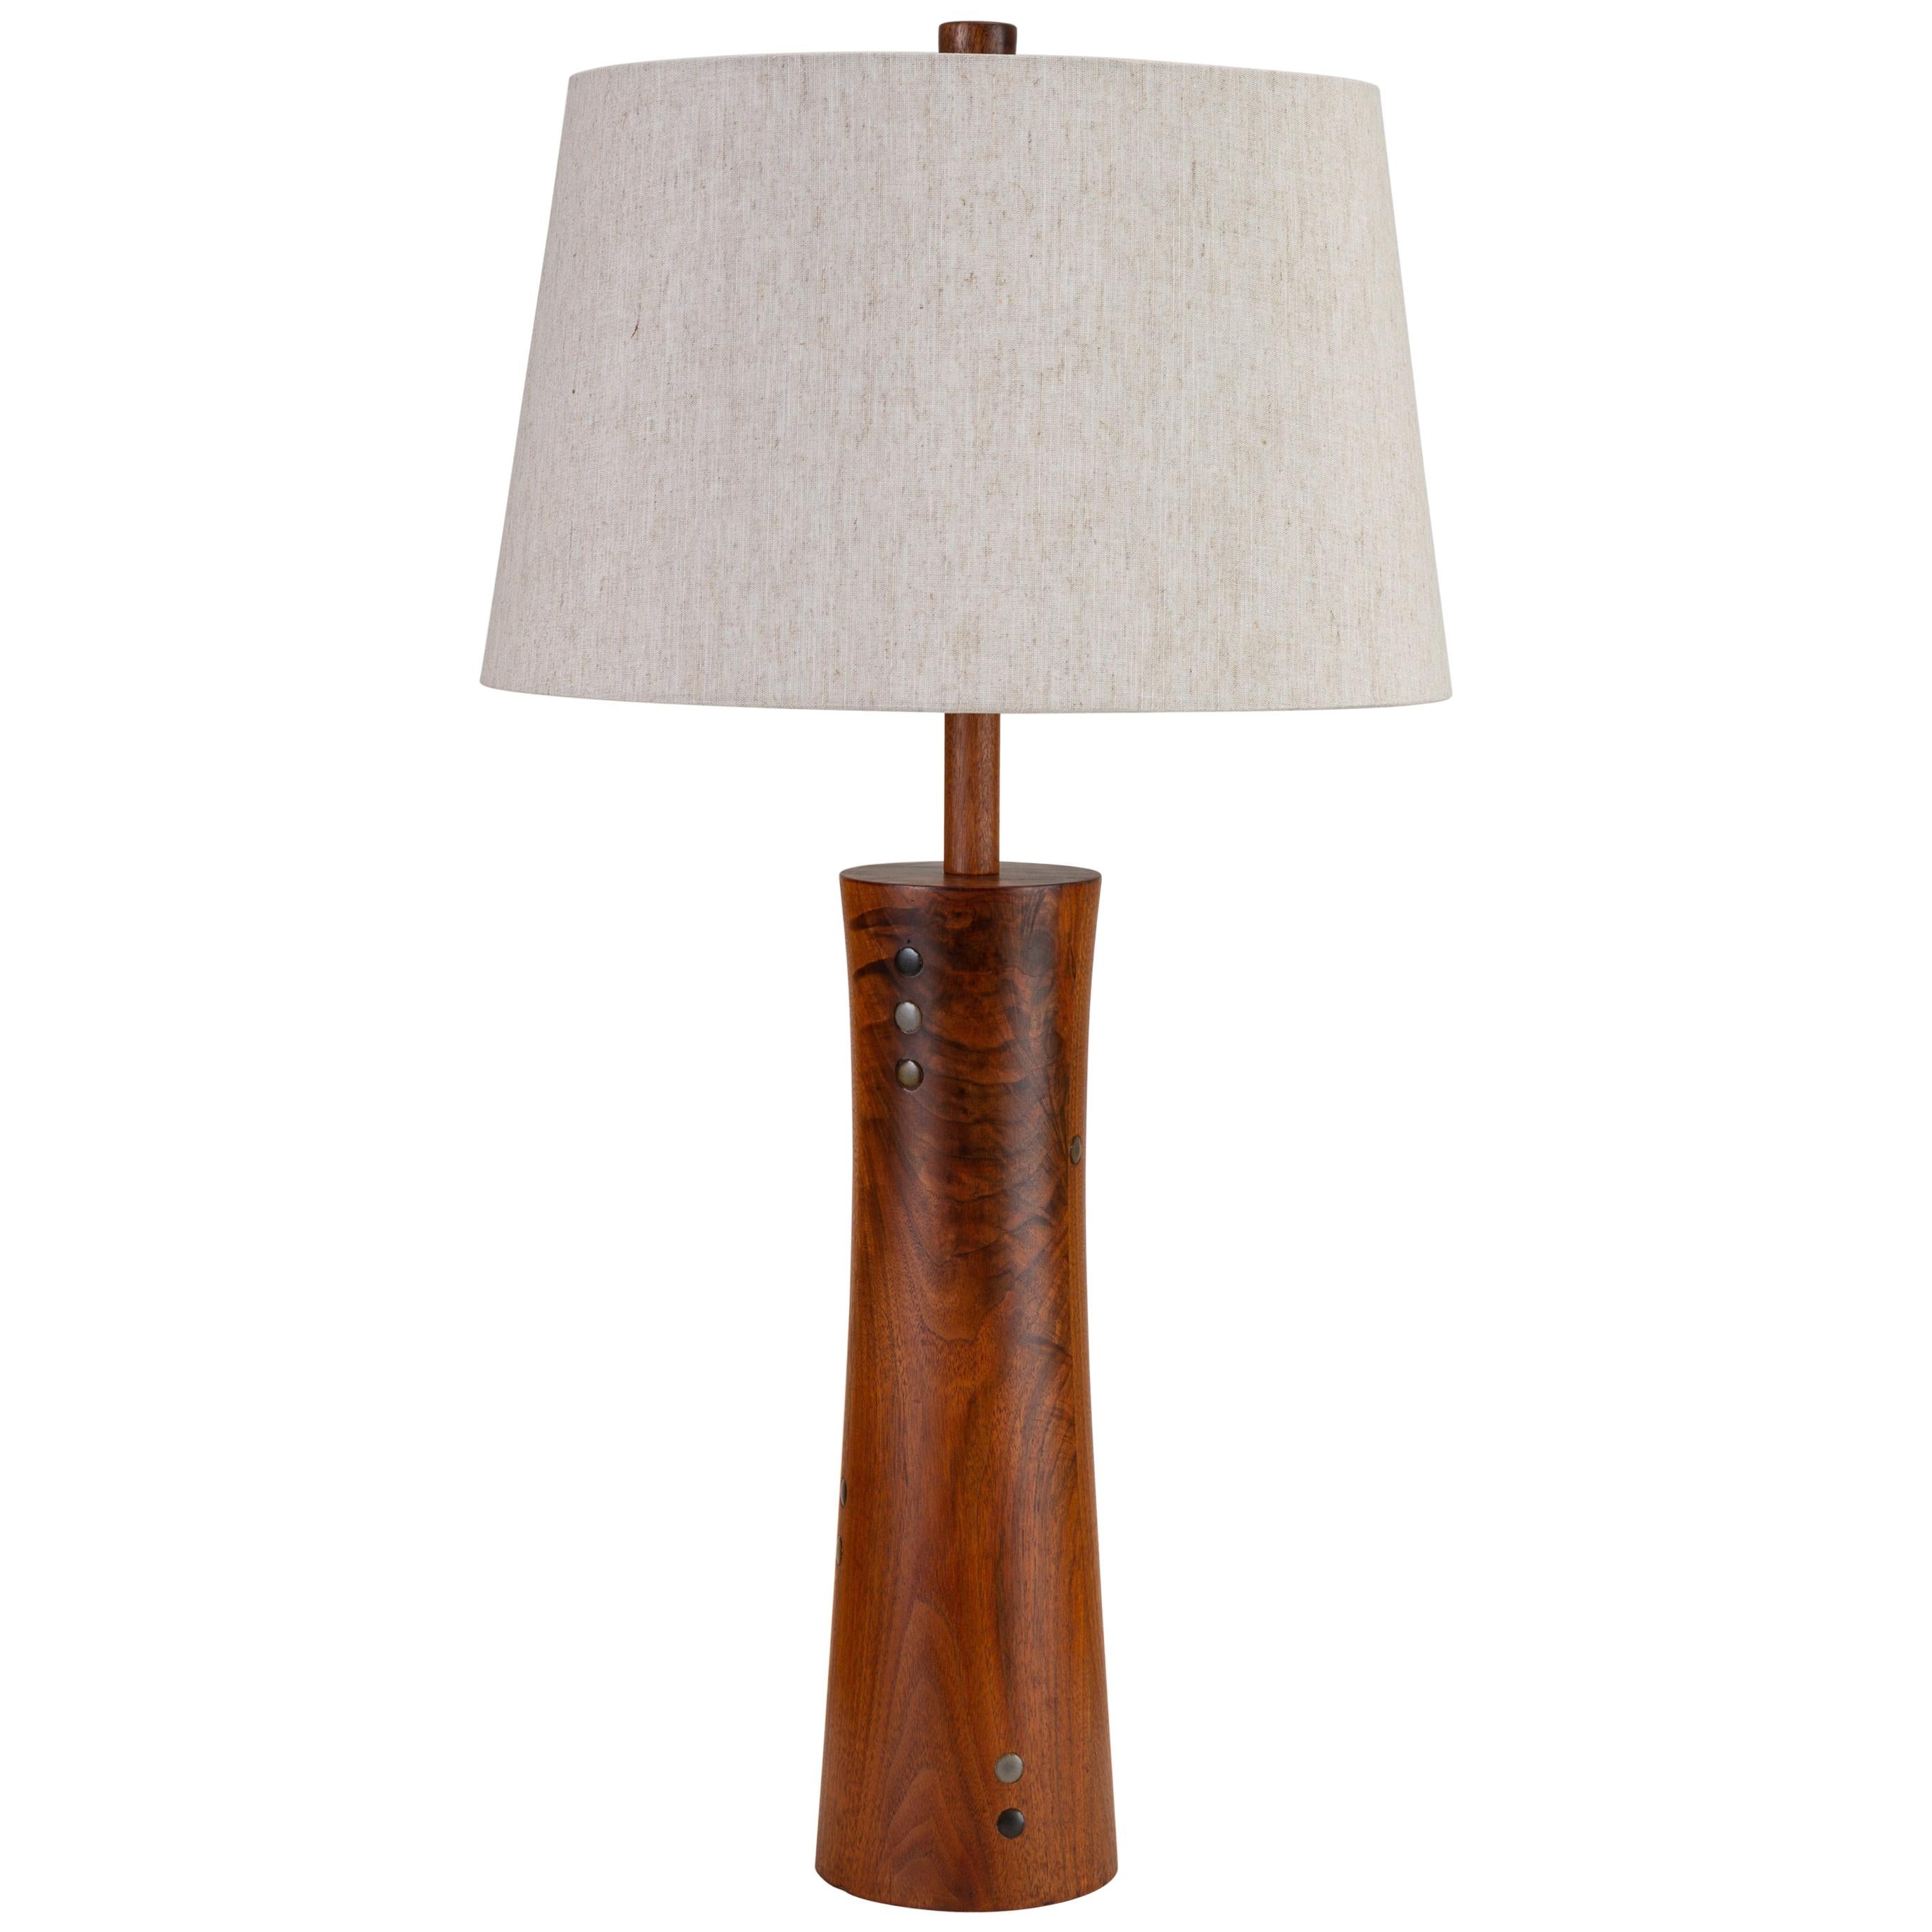 Wooden Table Lamp with Tile Inlay by Gordon & Jane Martz